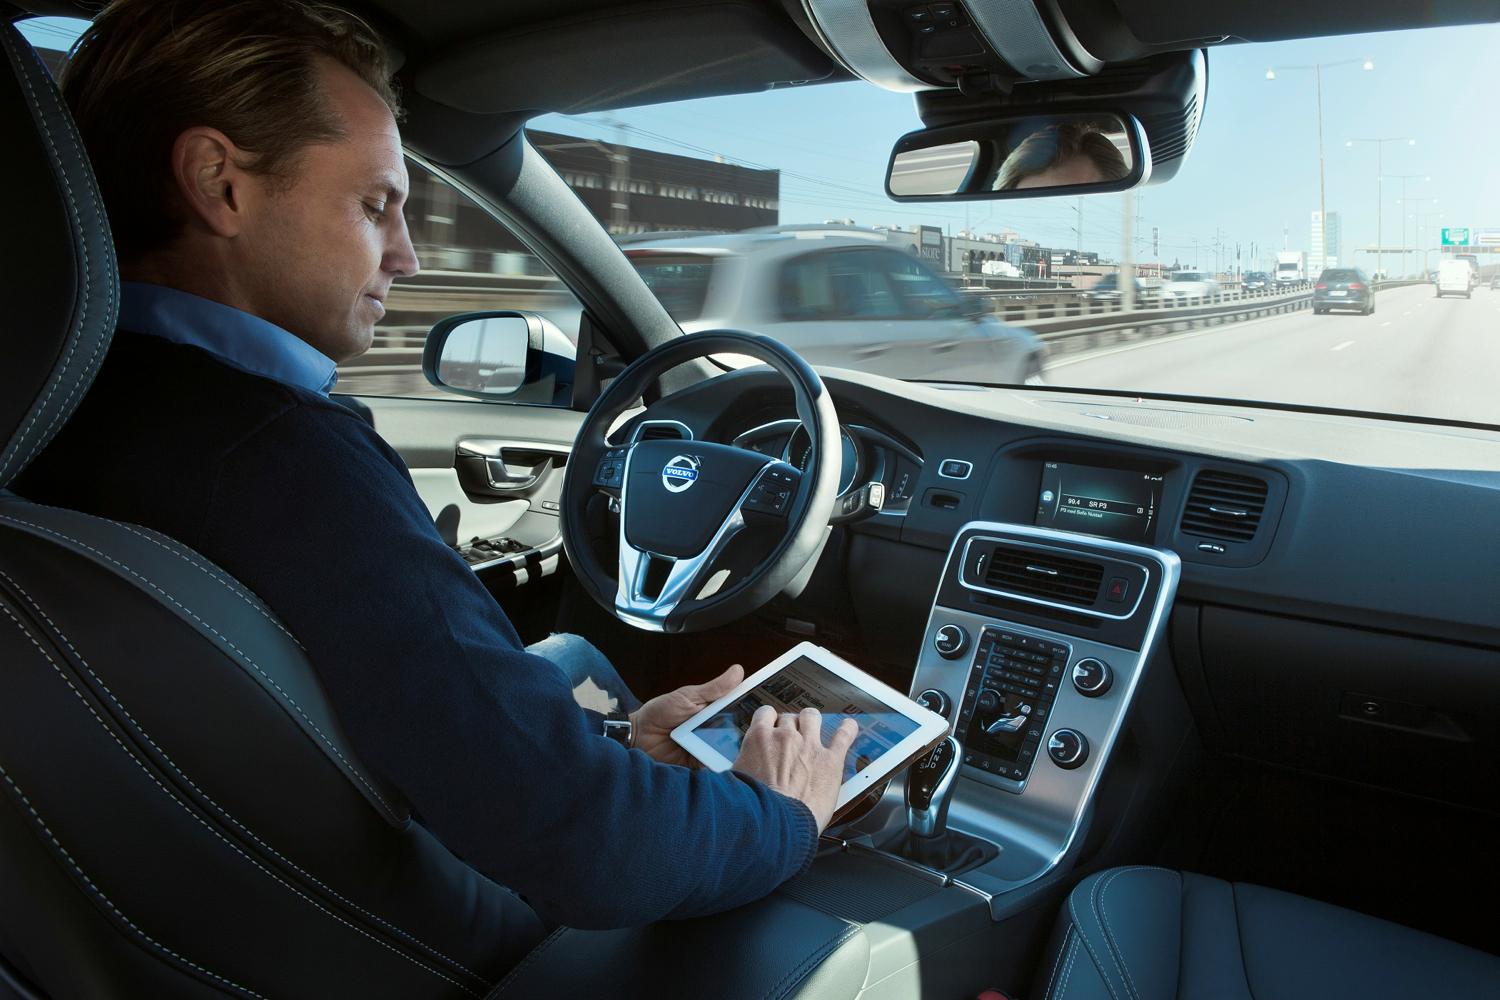 Understanding the Causes of Self-Driving Car Crashes